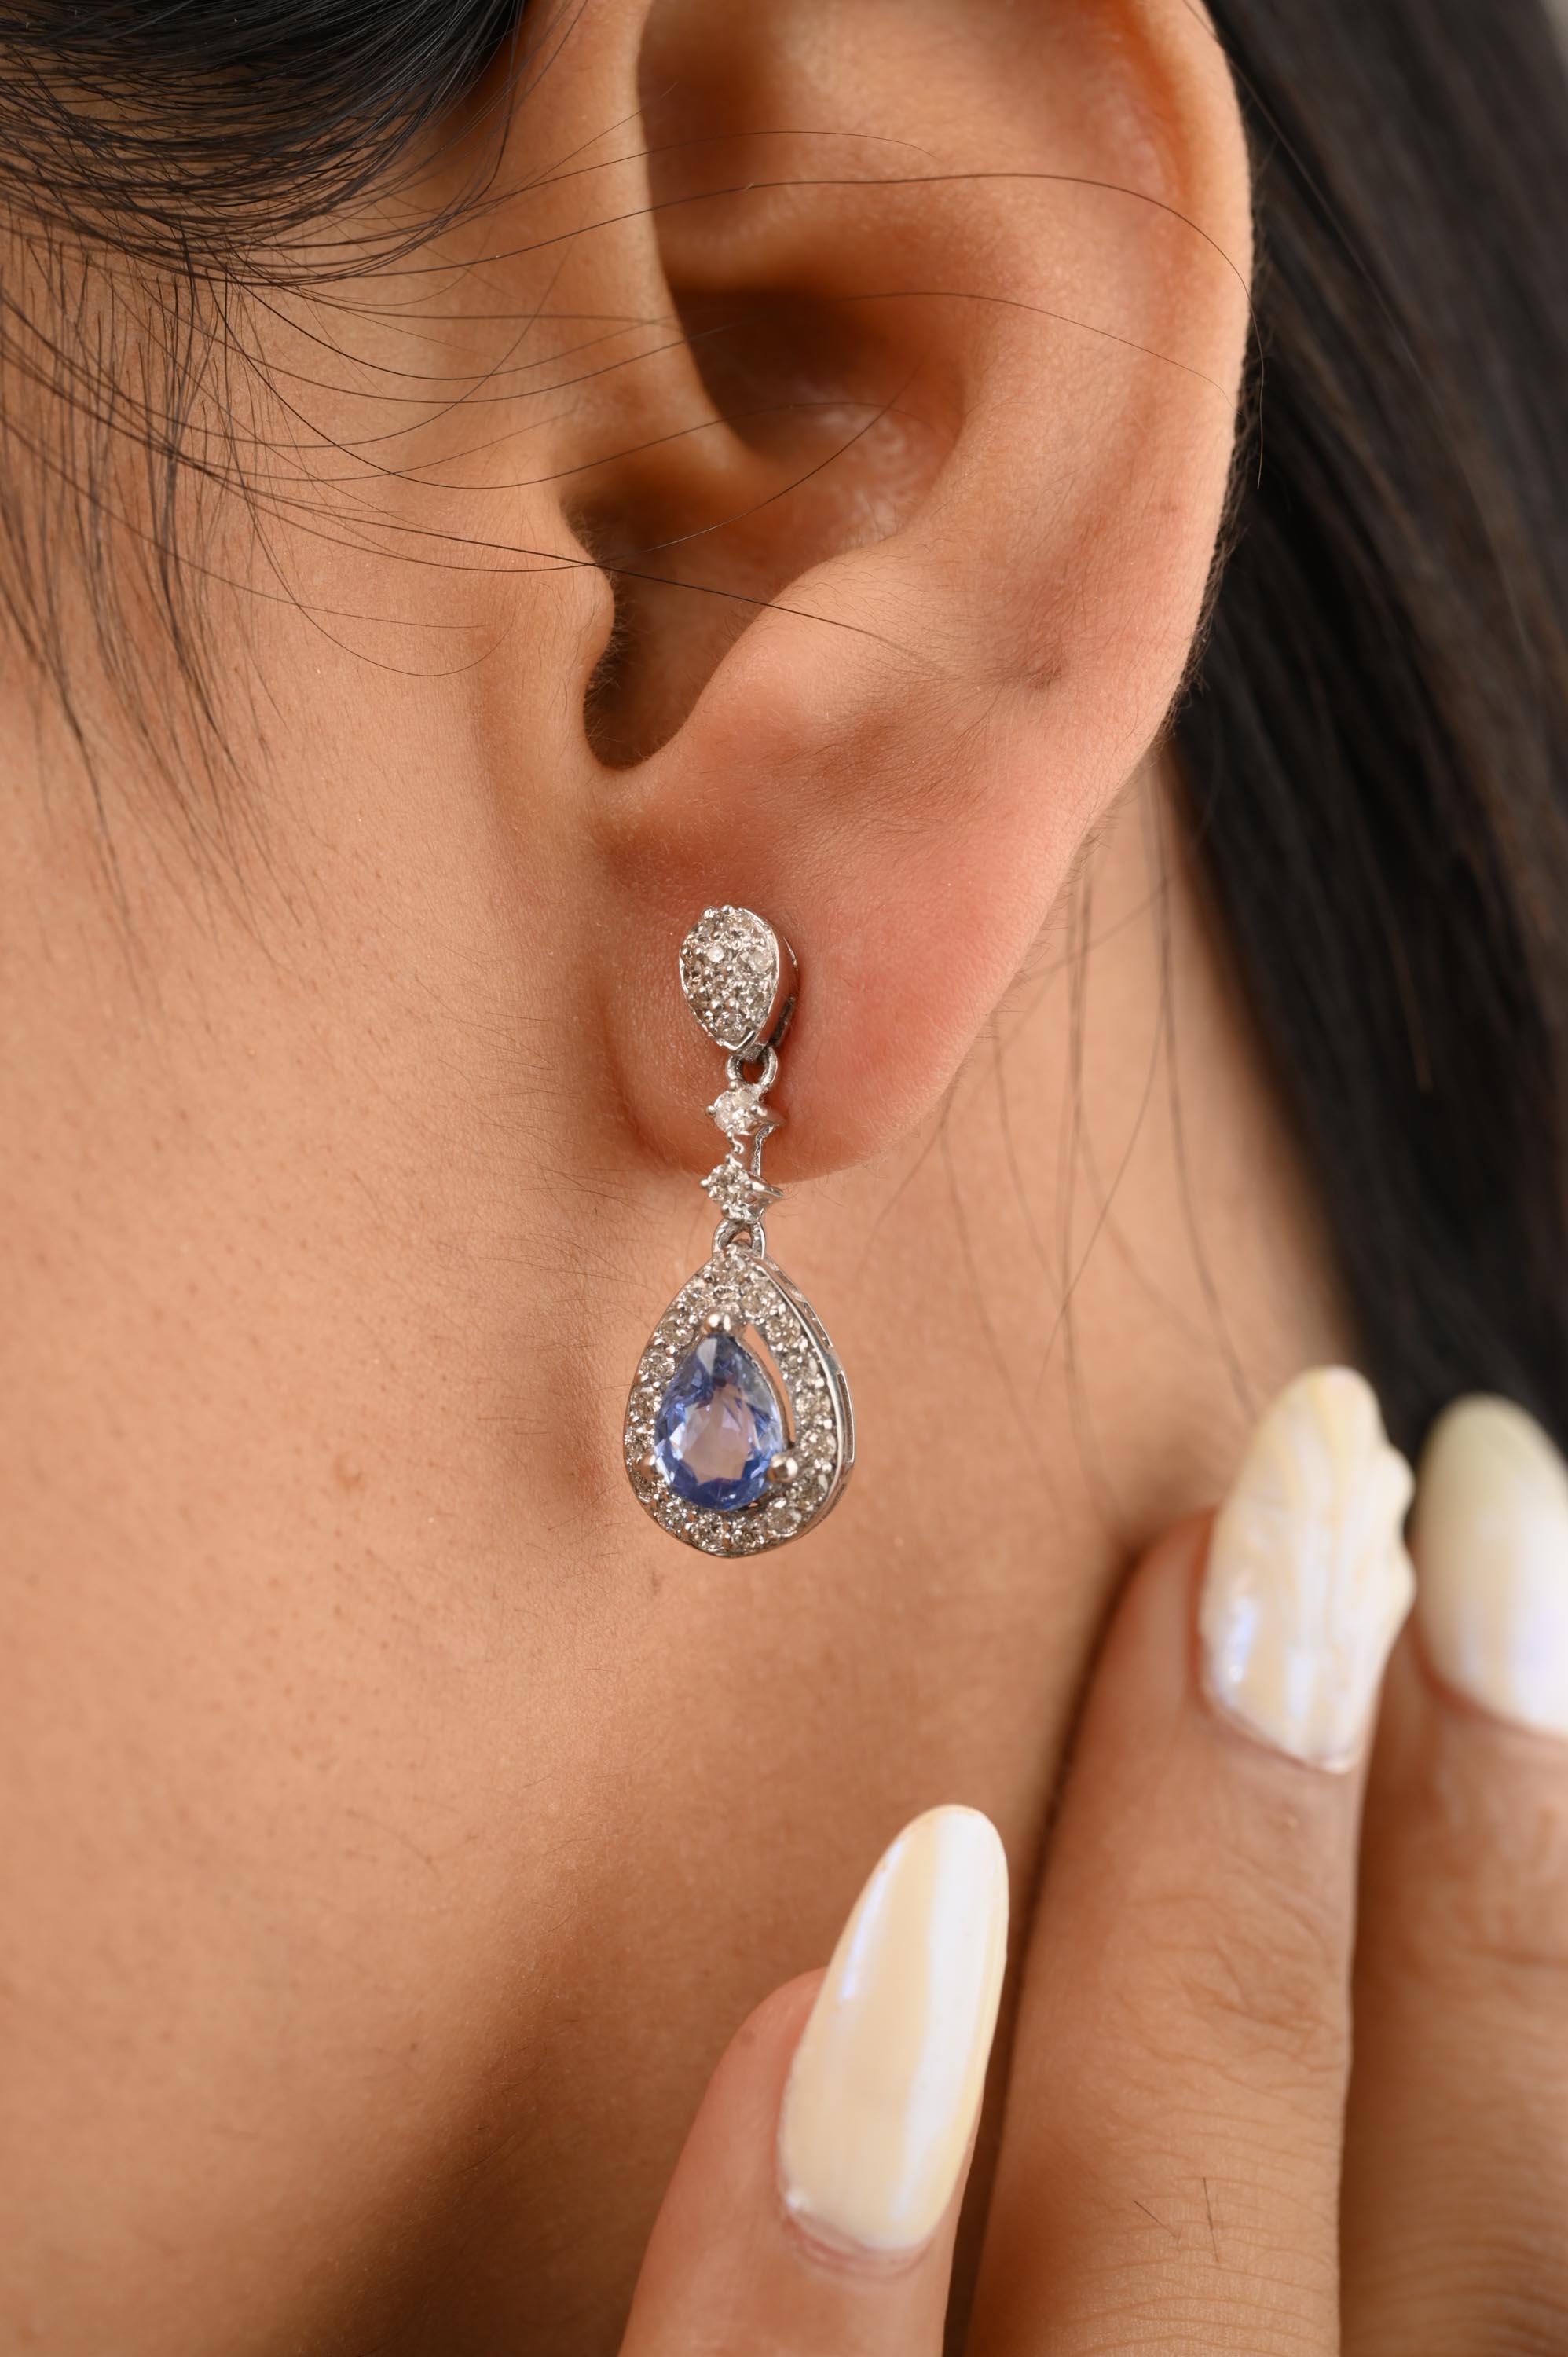 Pear Cut Genuine Blue Sapphire and Diamond Wedding Earrings in 14k Solid White Gold For Sale